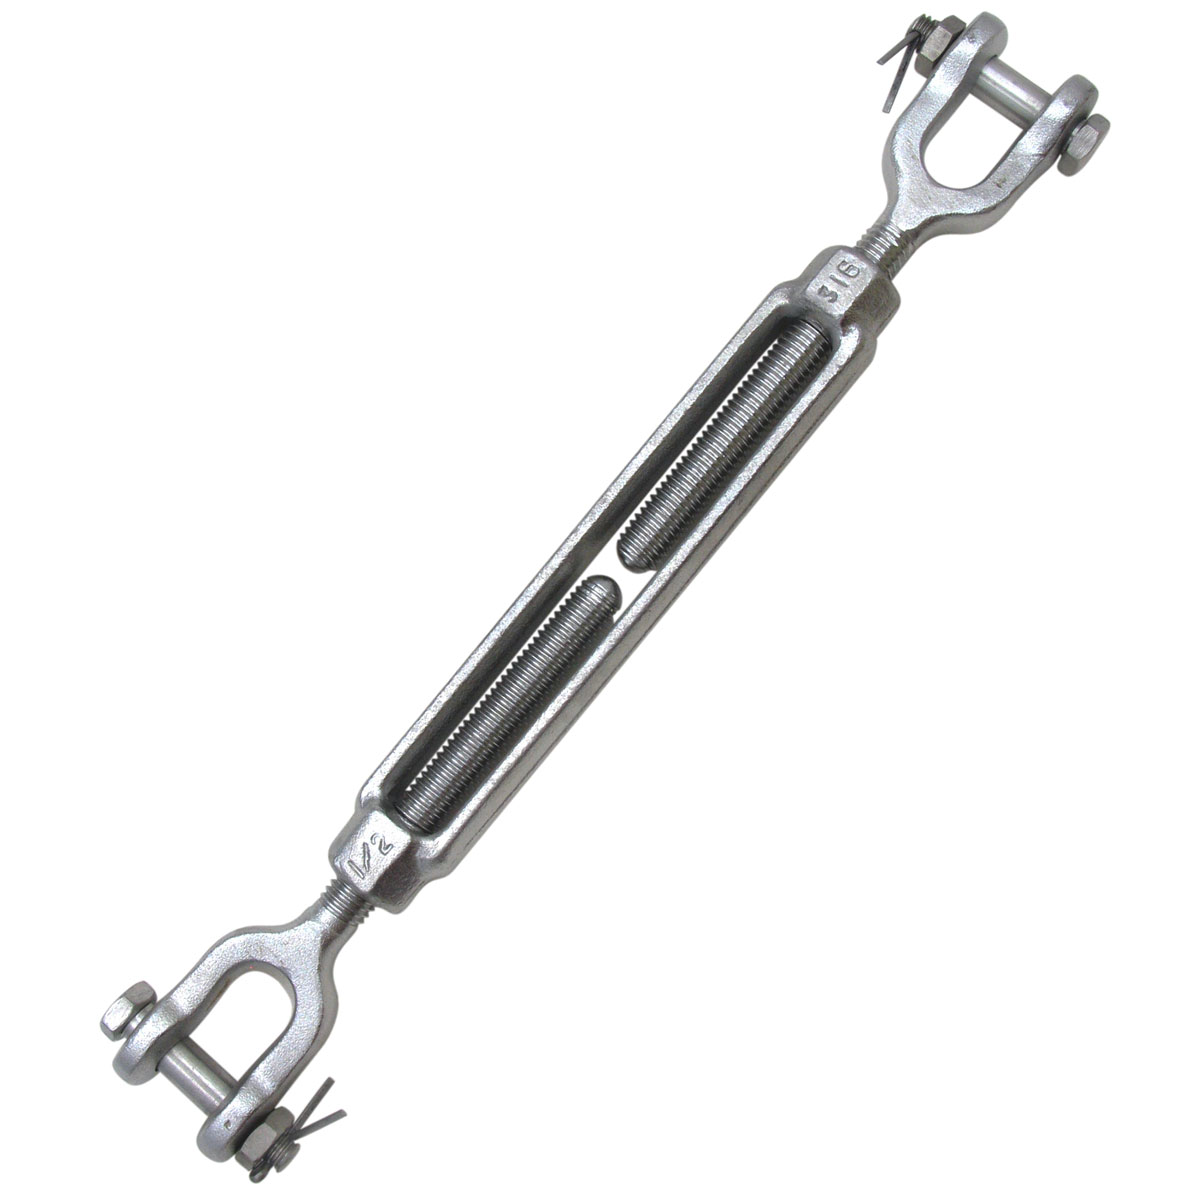 Stainless Turnbuckles